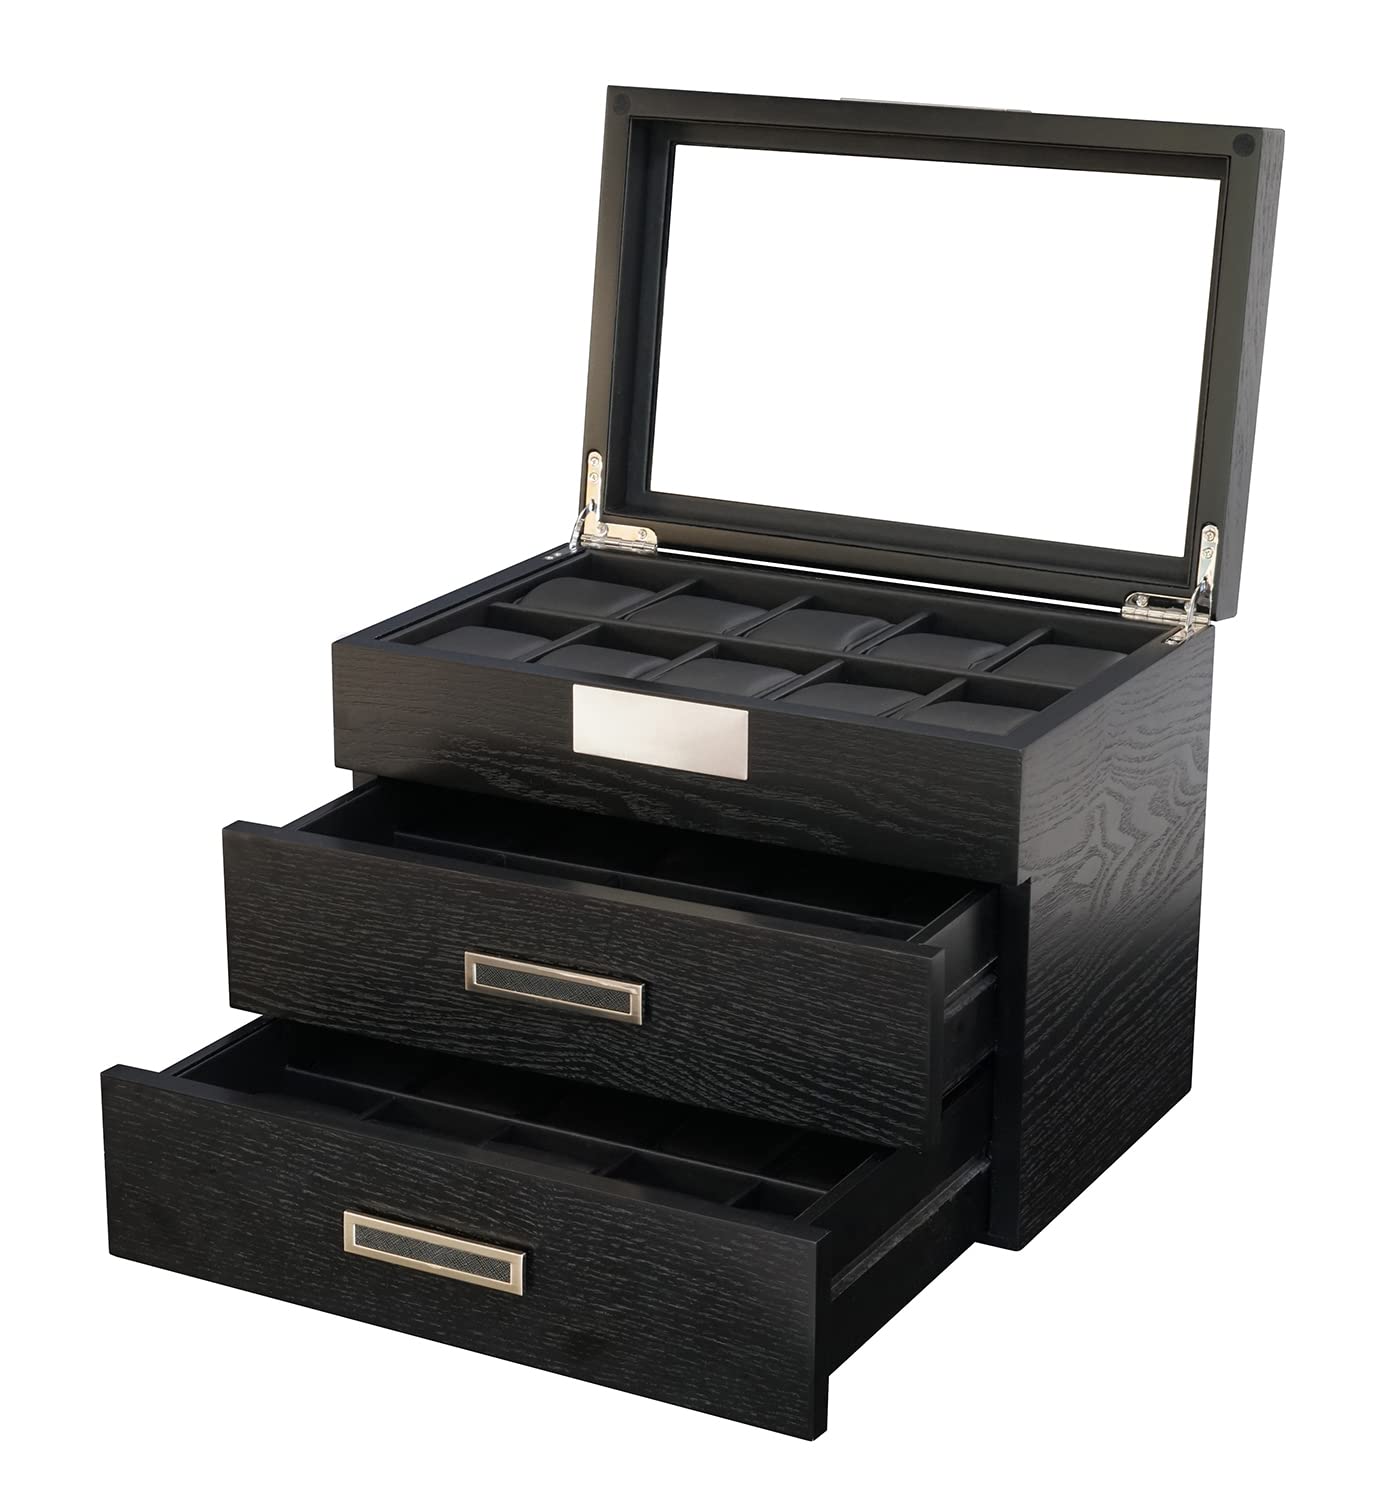 TIMELYBUYS 30 Black Ebony Wood Watch Extra Height Clearance Box Display Case 3 Level Storage Jewelry Organizer with Glass Top, Stainless Steel Accents, and 2 Drawers